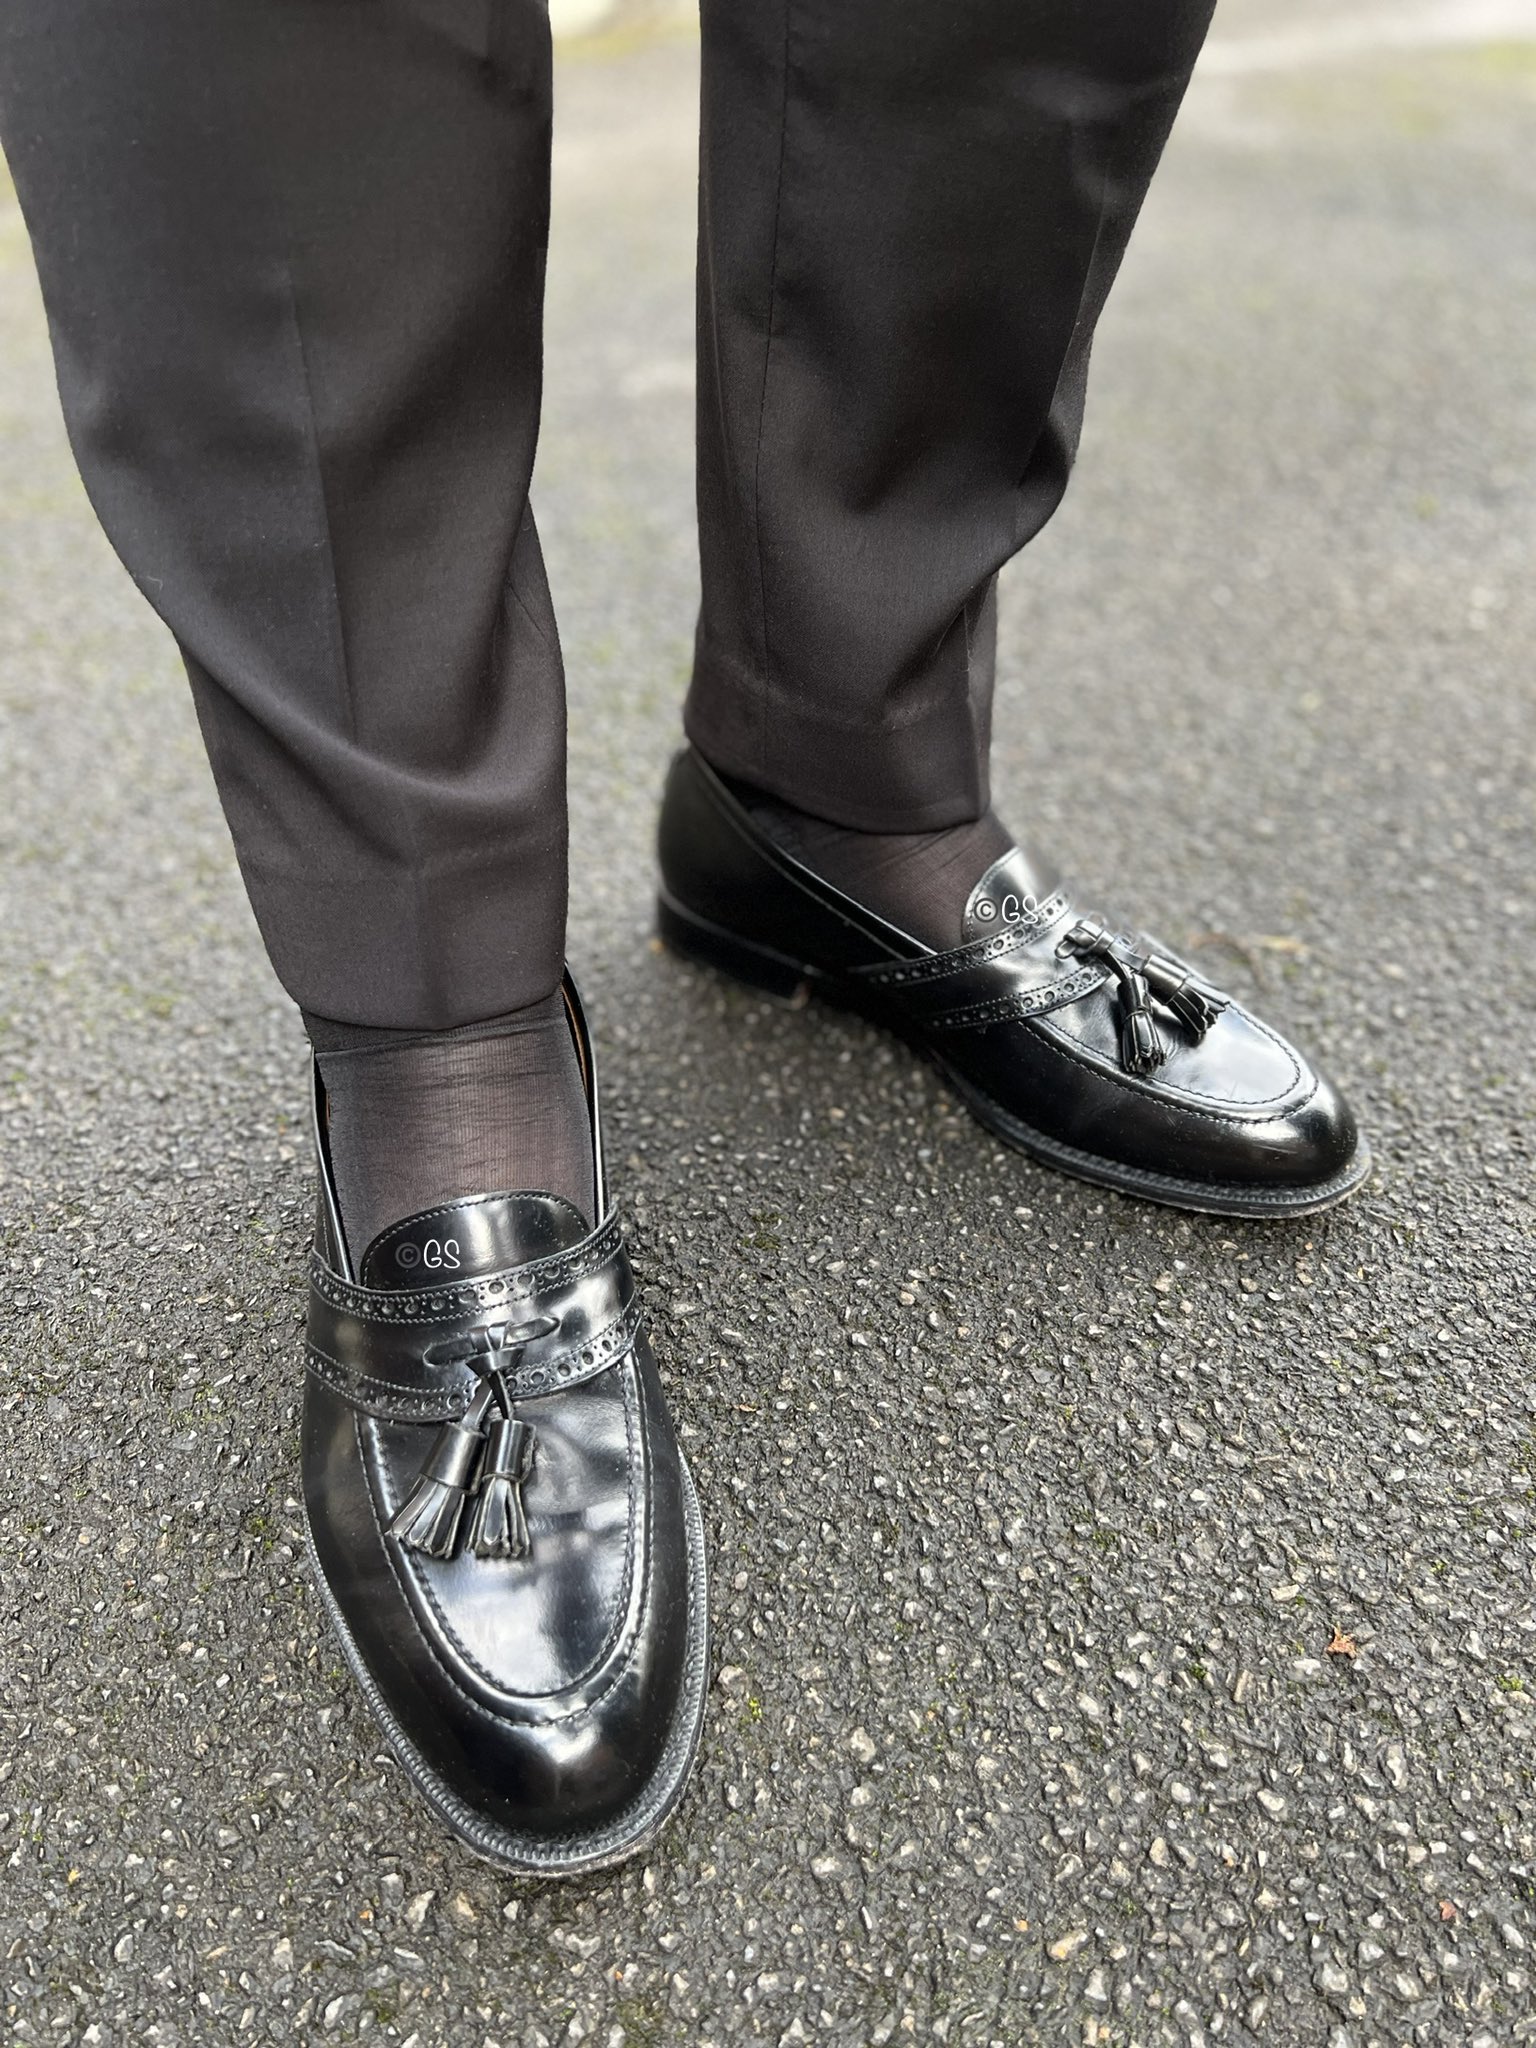 absorption ressource At bygge تويتر \ Gentleman's Shoes على تويتر: "Today is all about Churchs tassel  loafers and black sheer socks. #shoesaddict #shoe #shoes #loafer #loafers  #tasselloafer #sock #socks #sockswag #footwear #foot #feet #sheersocks  #Mensfashion #menstyle #